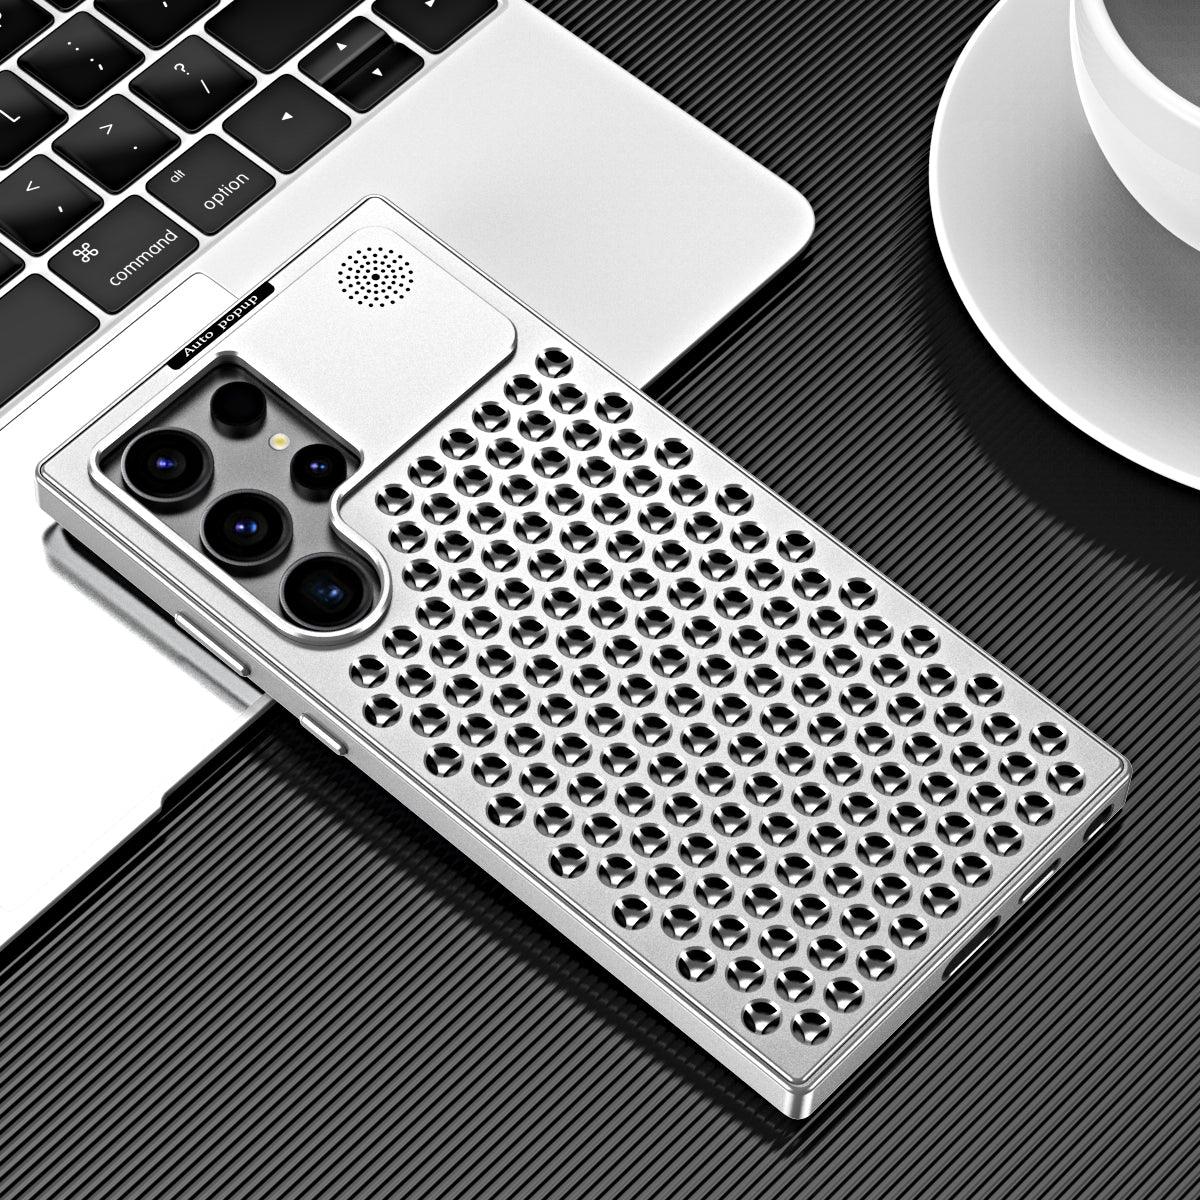 R-Just Aluminum Metal Heat Dissipation Aromatherapy Protective Case Cover